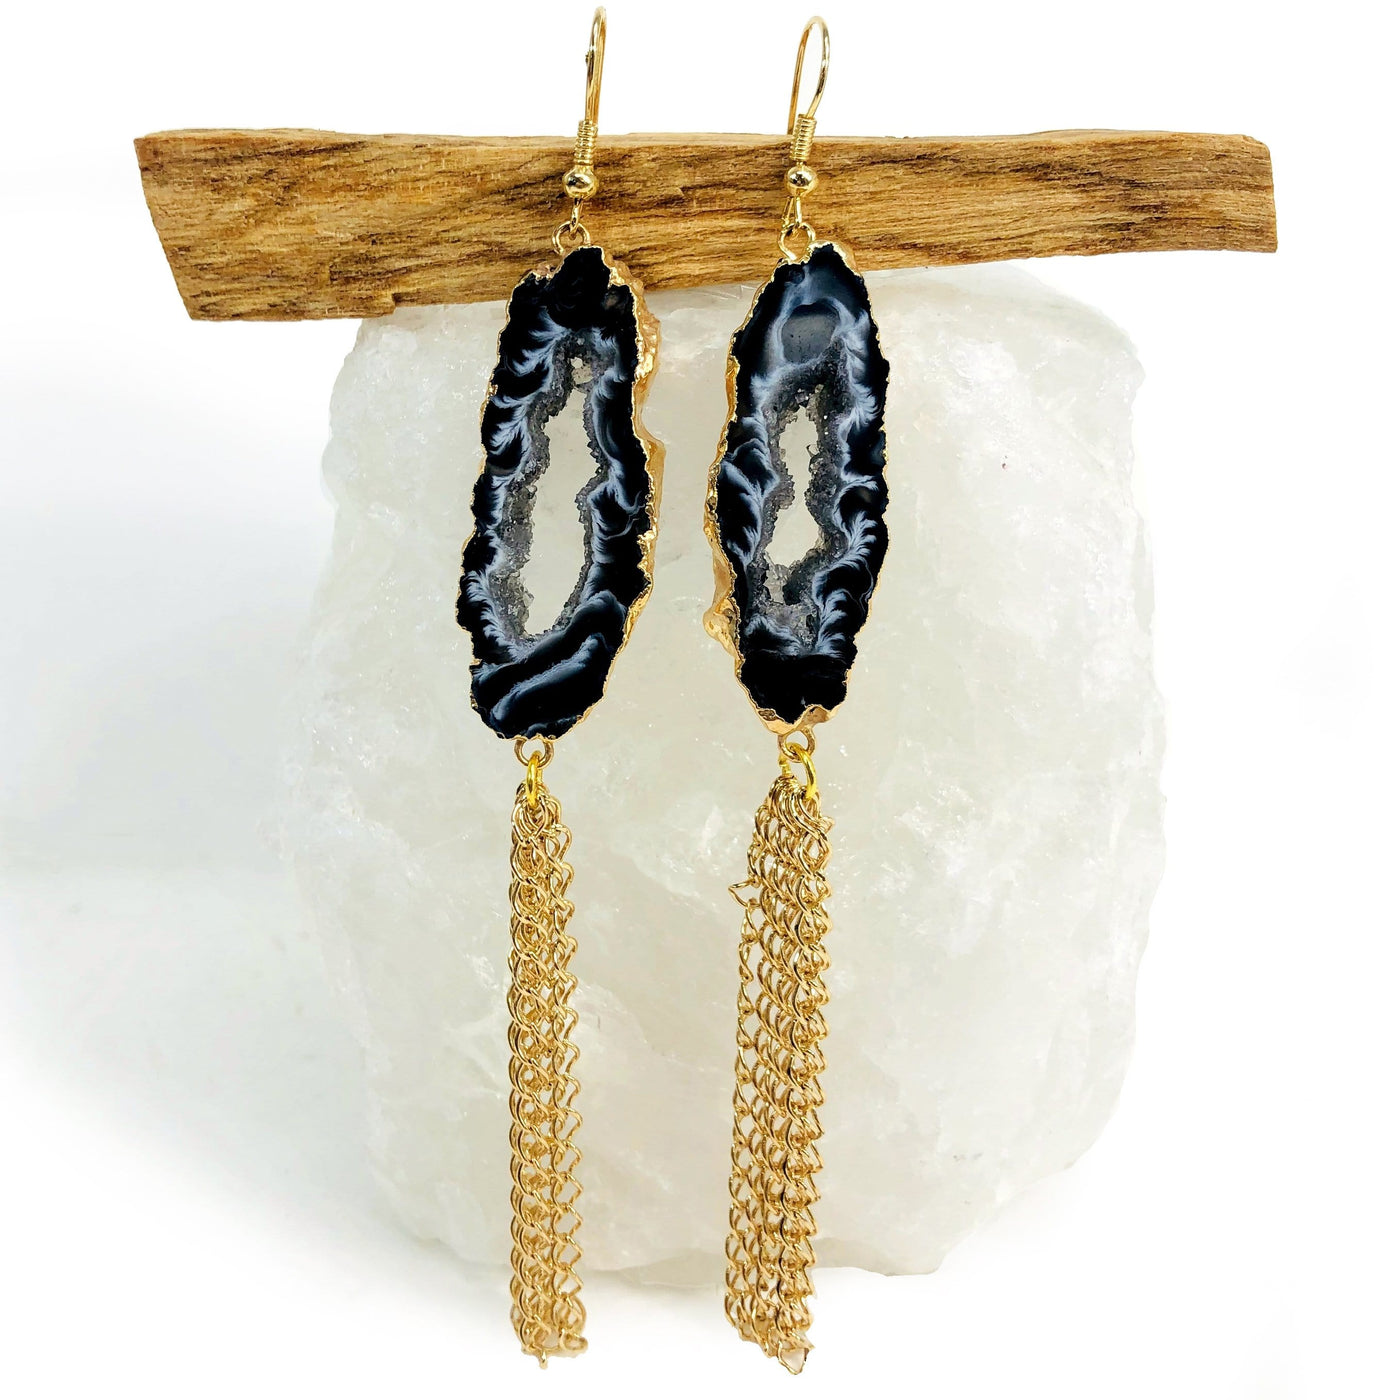 One pair of gold tone agate Geode Slice Dangle Earrings displayed on a crystal with a white background.